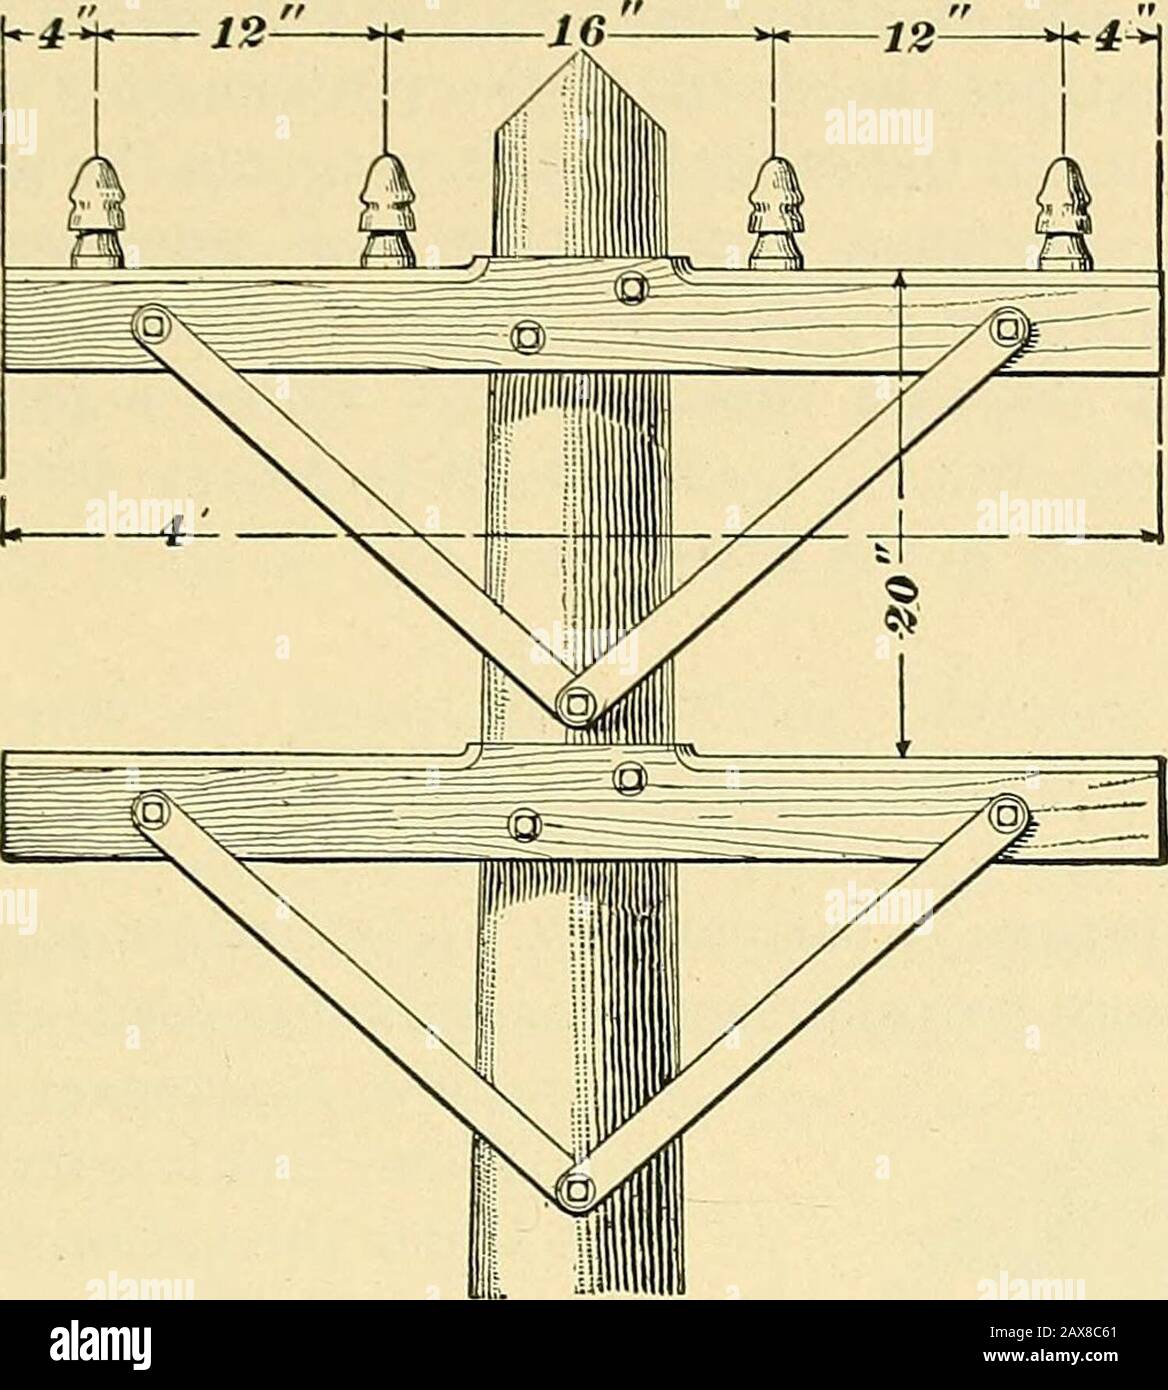 Electric engineering.] . ires to be carried, andtherefore the number of  cross-arms, determines to someextent the general height of the pole to be  used. 5. Spacing of Poles.—Practice varies as to the